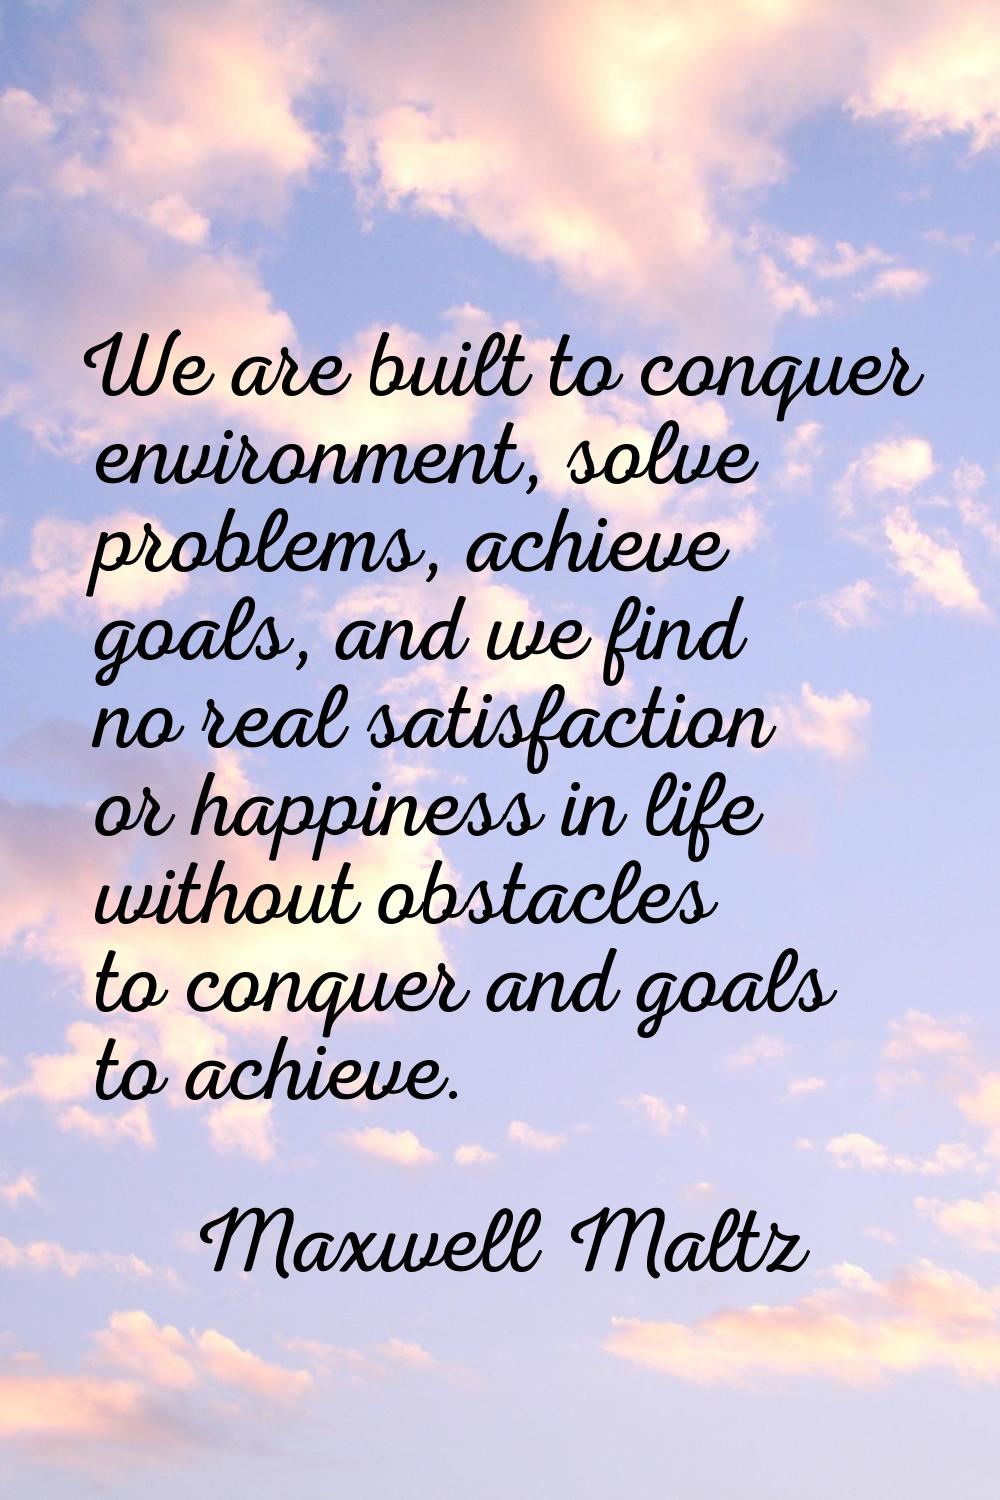 We are built to conquer environment, solve problems, achieve goals, and we find no real satisfactio